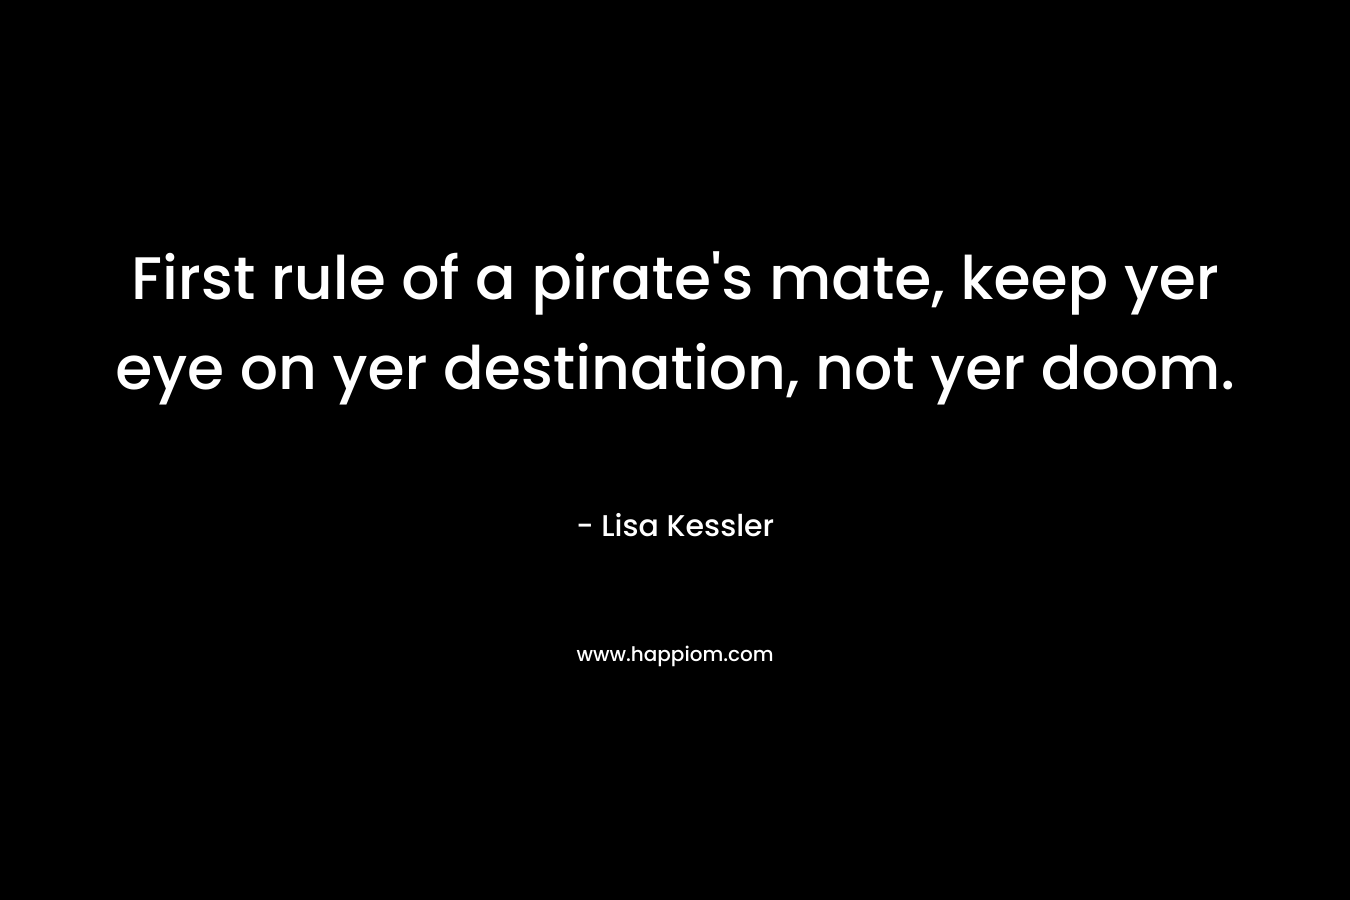 First rule of a pirate's mate, keep yer eye on yer destination, not yer doom.